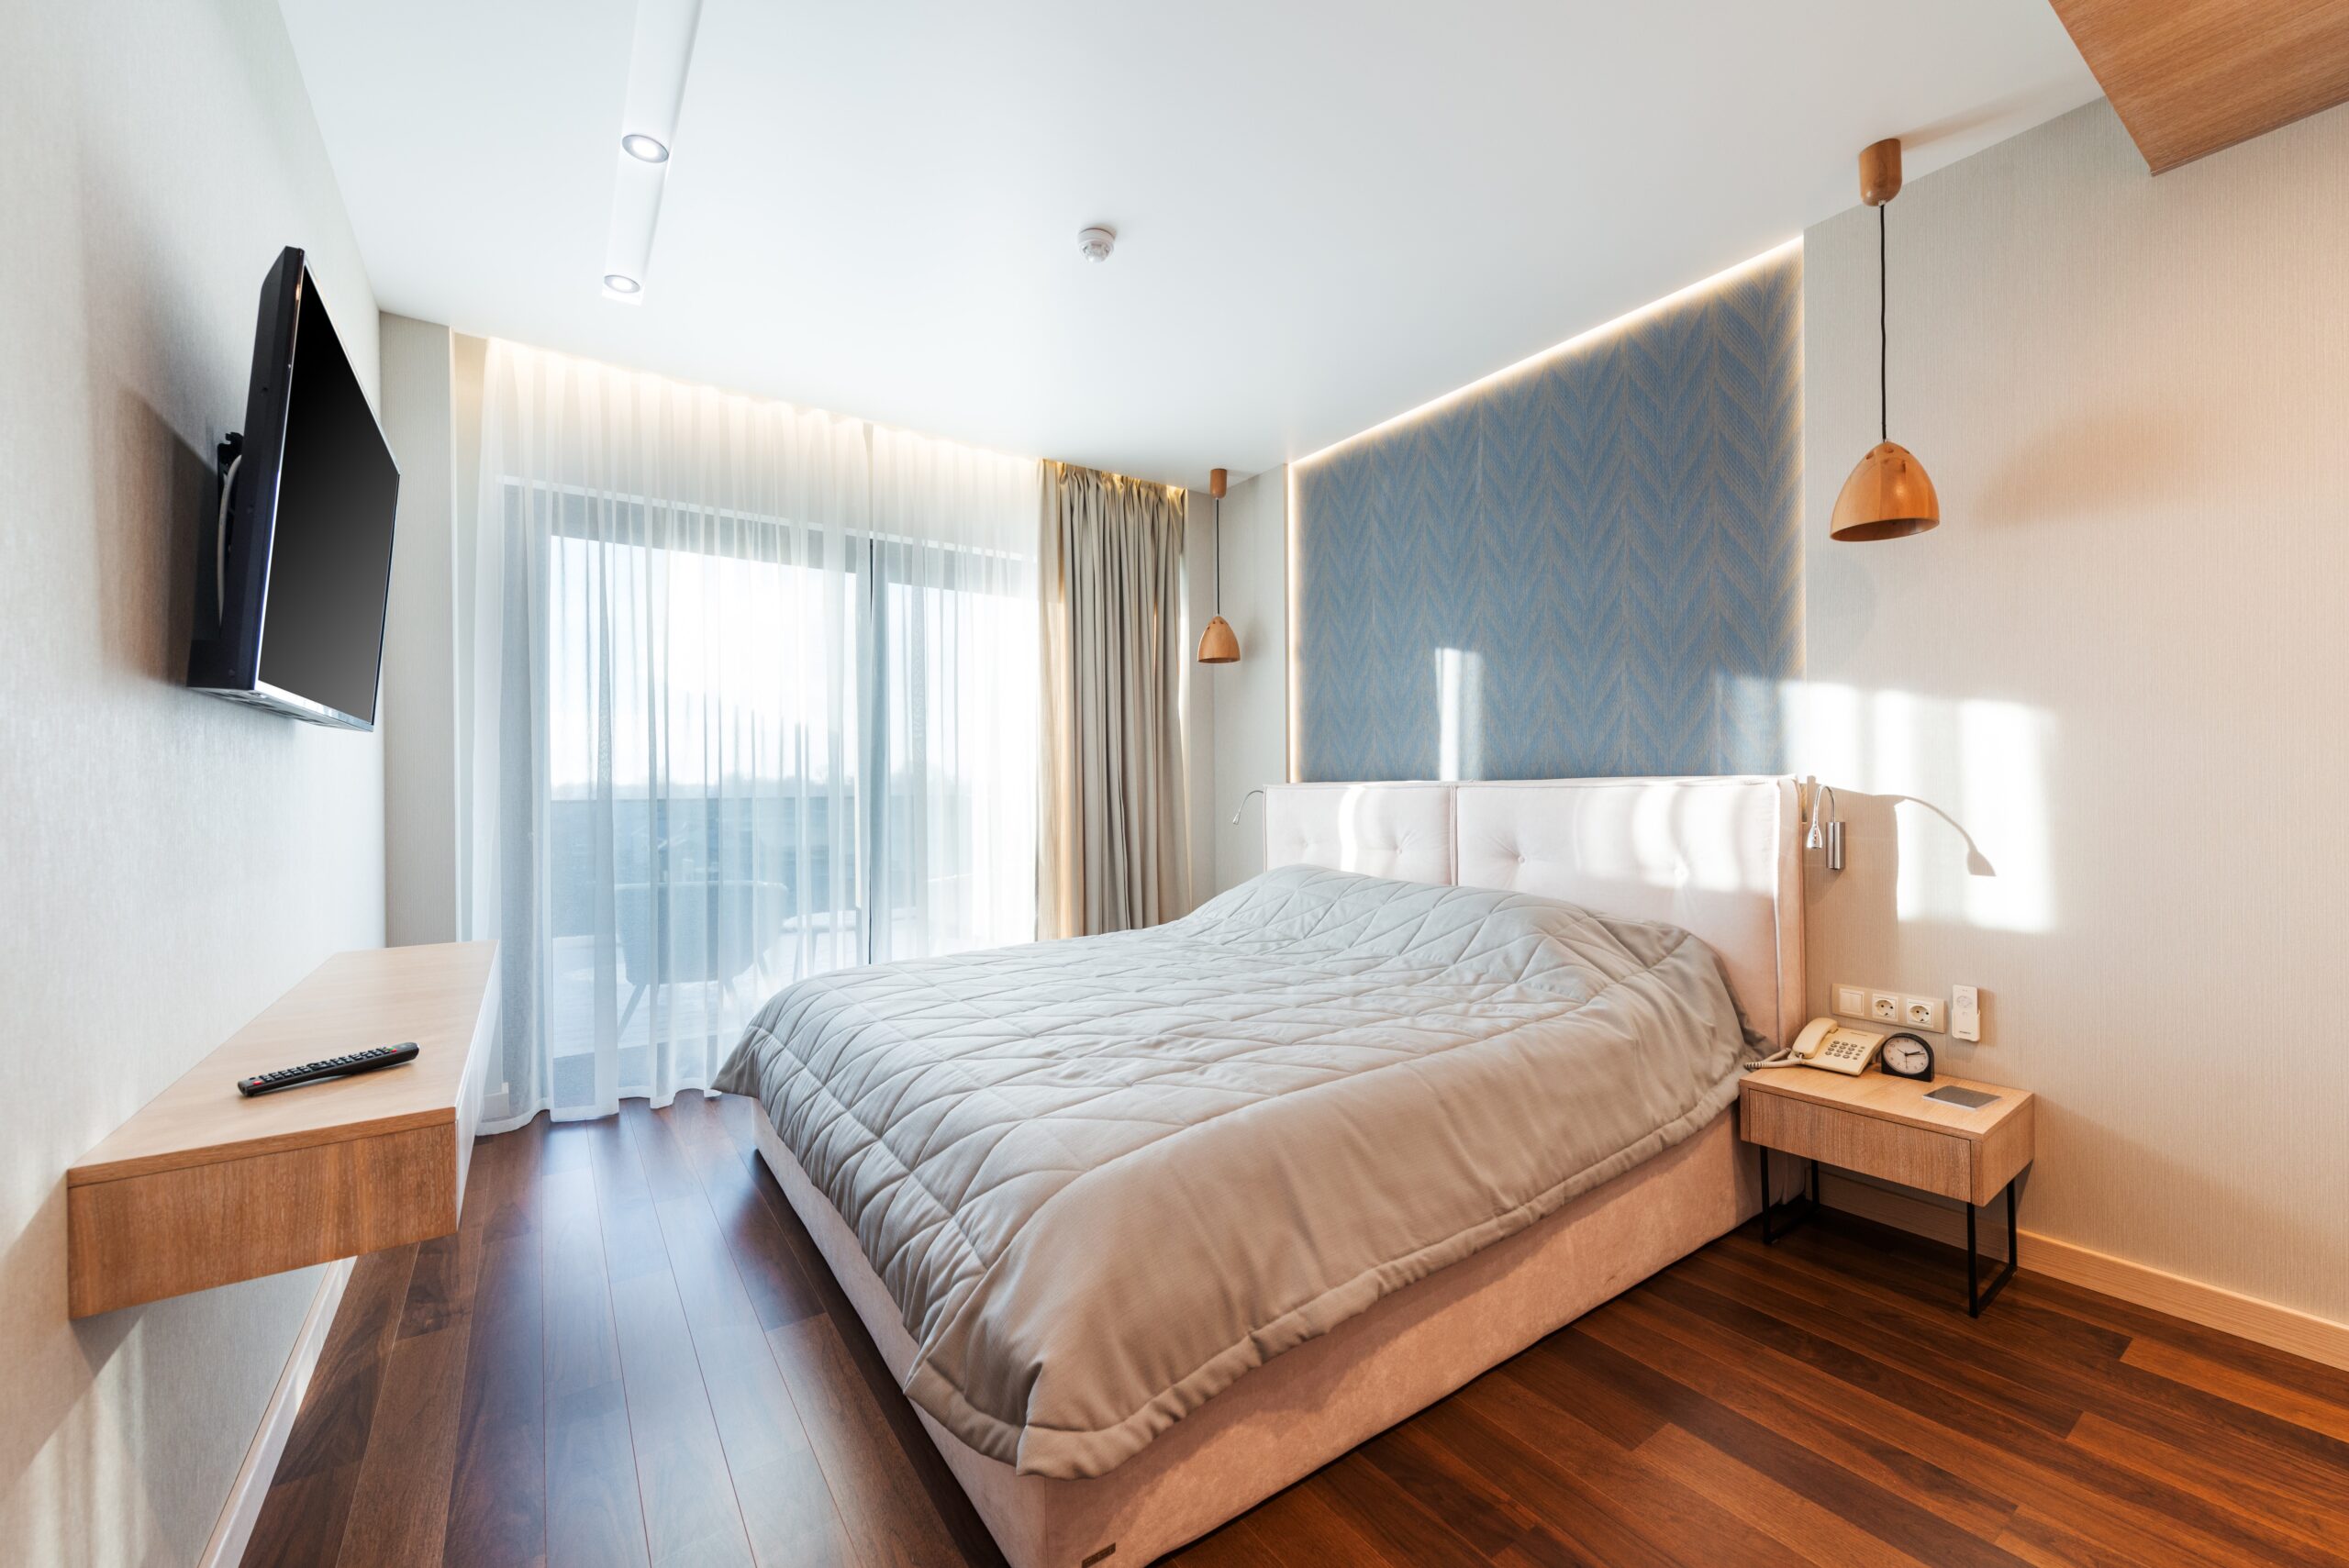 bedroom interior with bed and nightstand and parquet floor in sunlight 